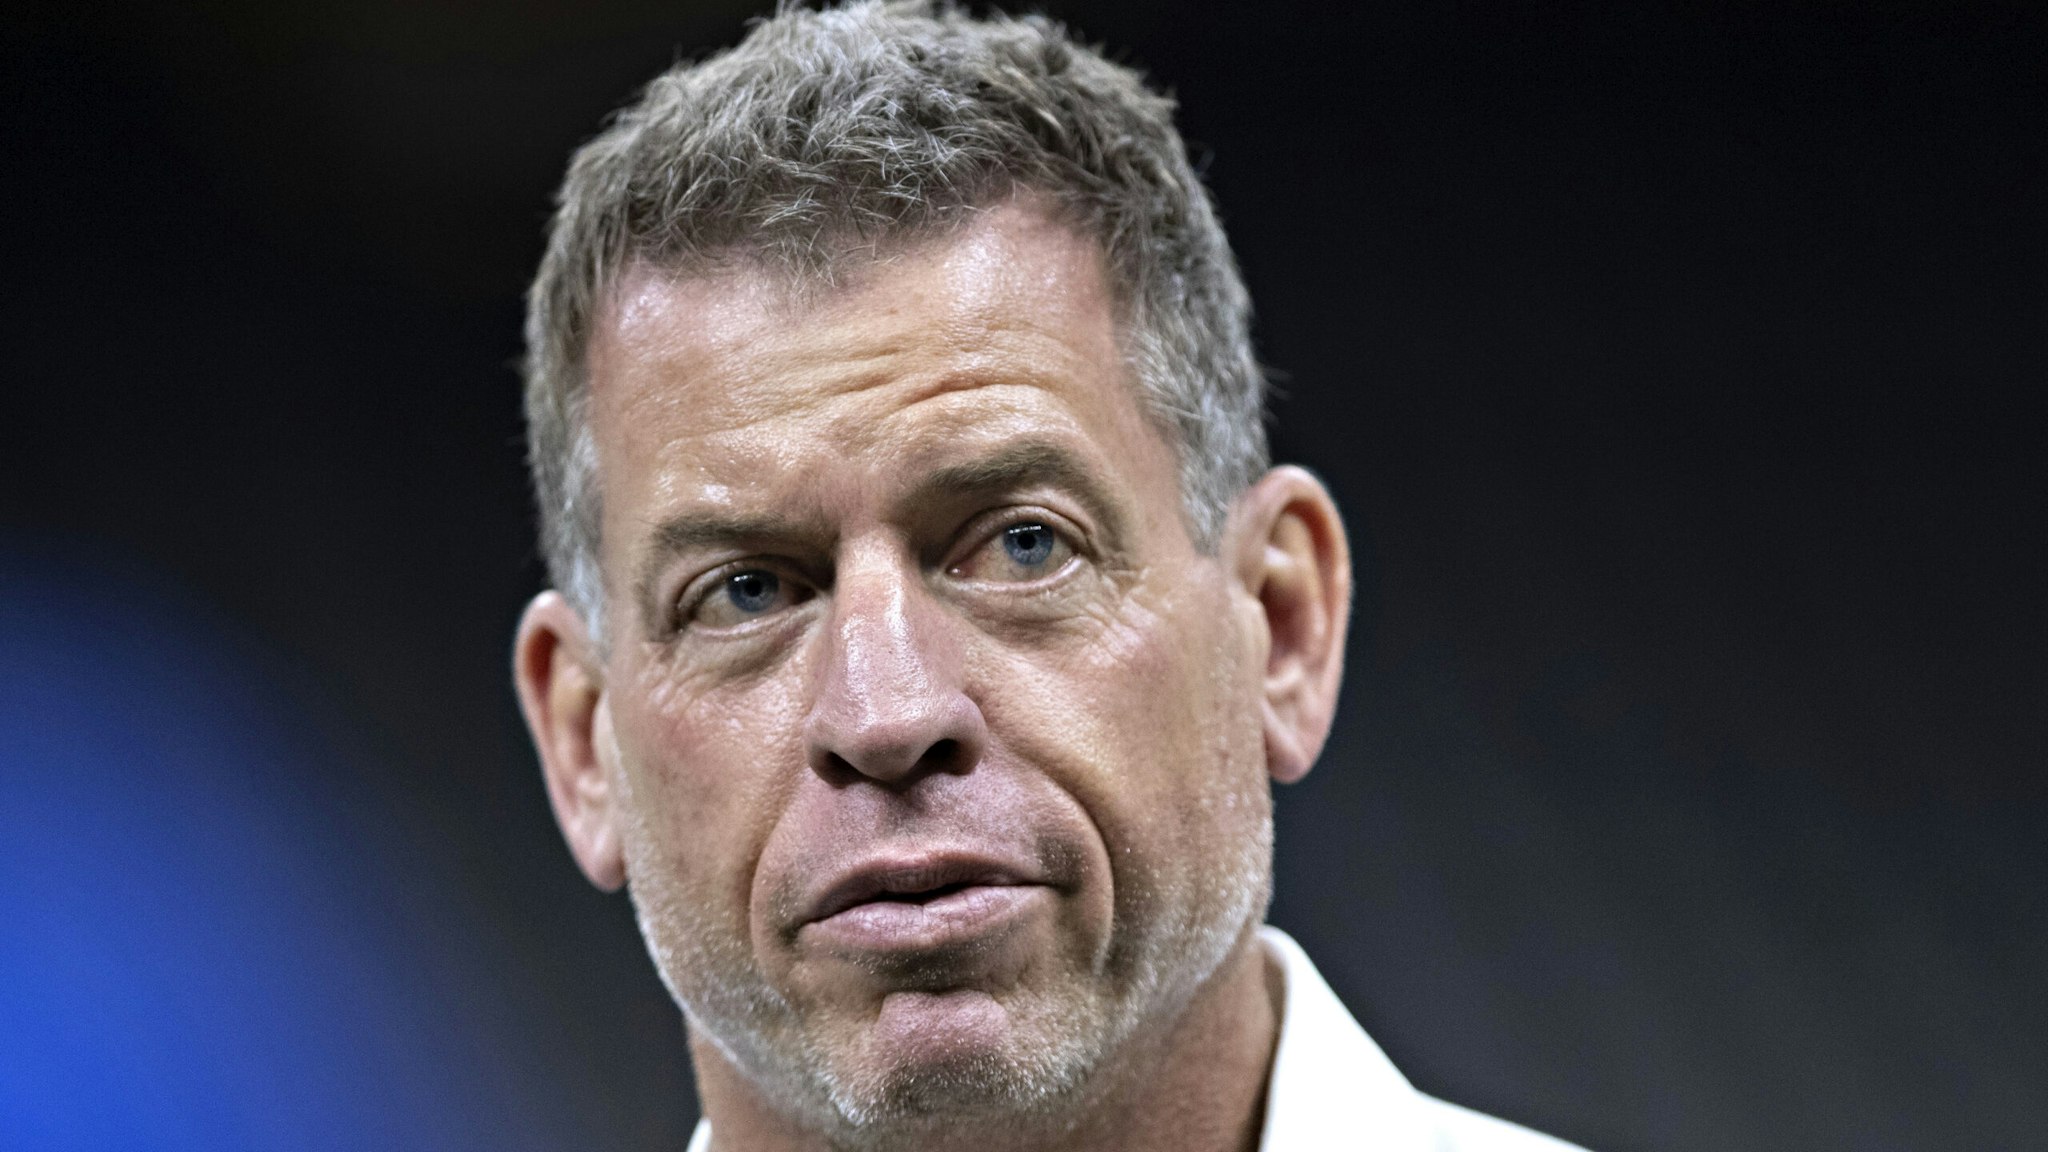 NEW ORLEANS, LA - NOVEMBER 4: Troy Aikman on the field before a game between the Los Angeles Rams and the New Orleans Saints at Mercedes-Benz Superdome on November 4, 2018 in New Orleans, Louisiana. The Saints defeated the Rams 45-35.